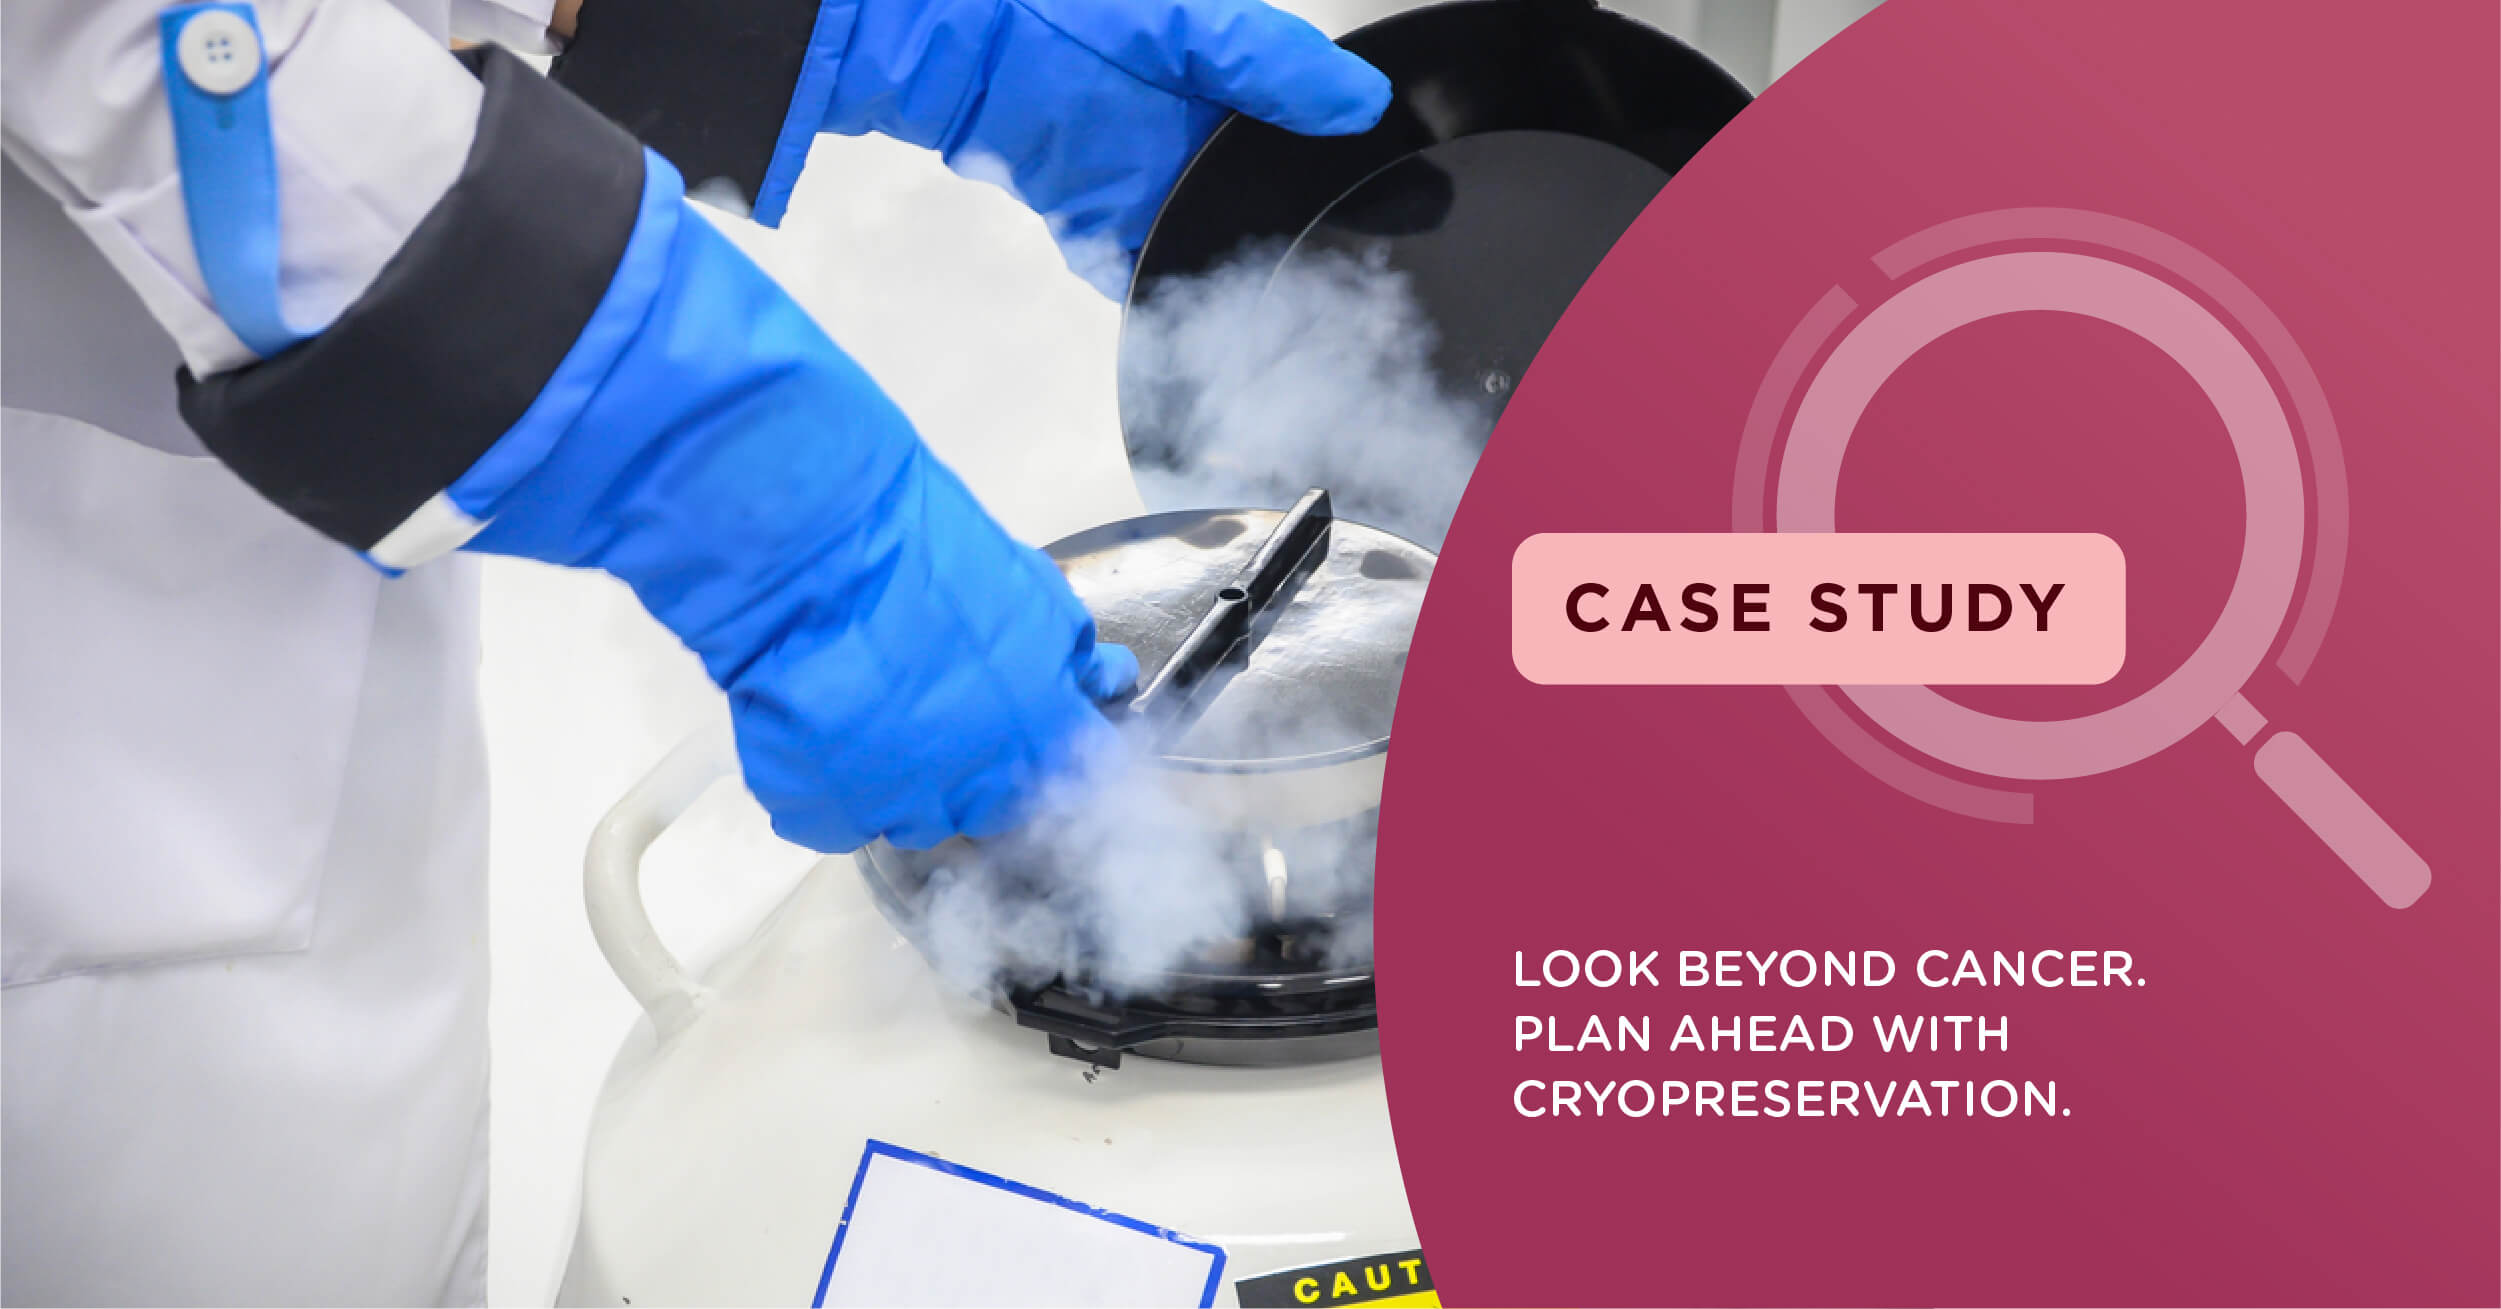 Look beyond Cancer, Plan Ahead With Cryopreservation